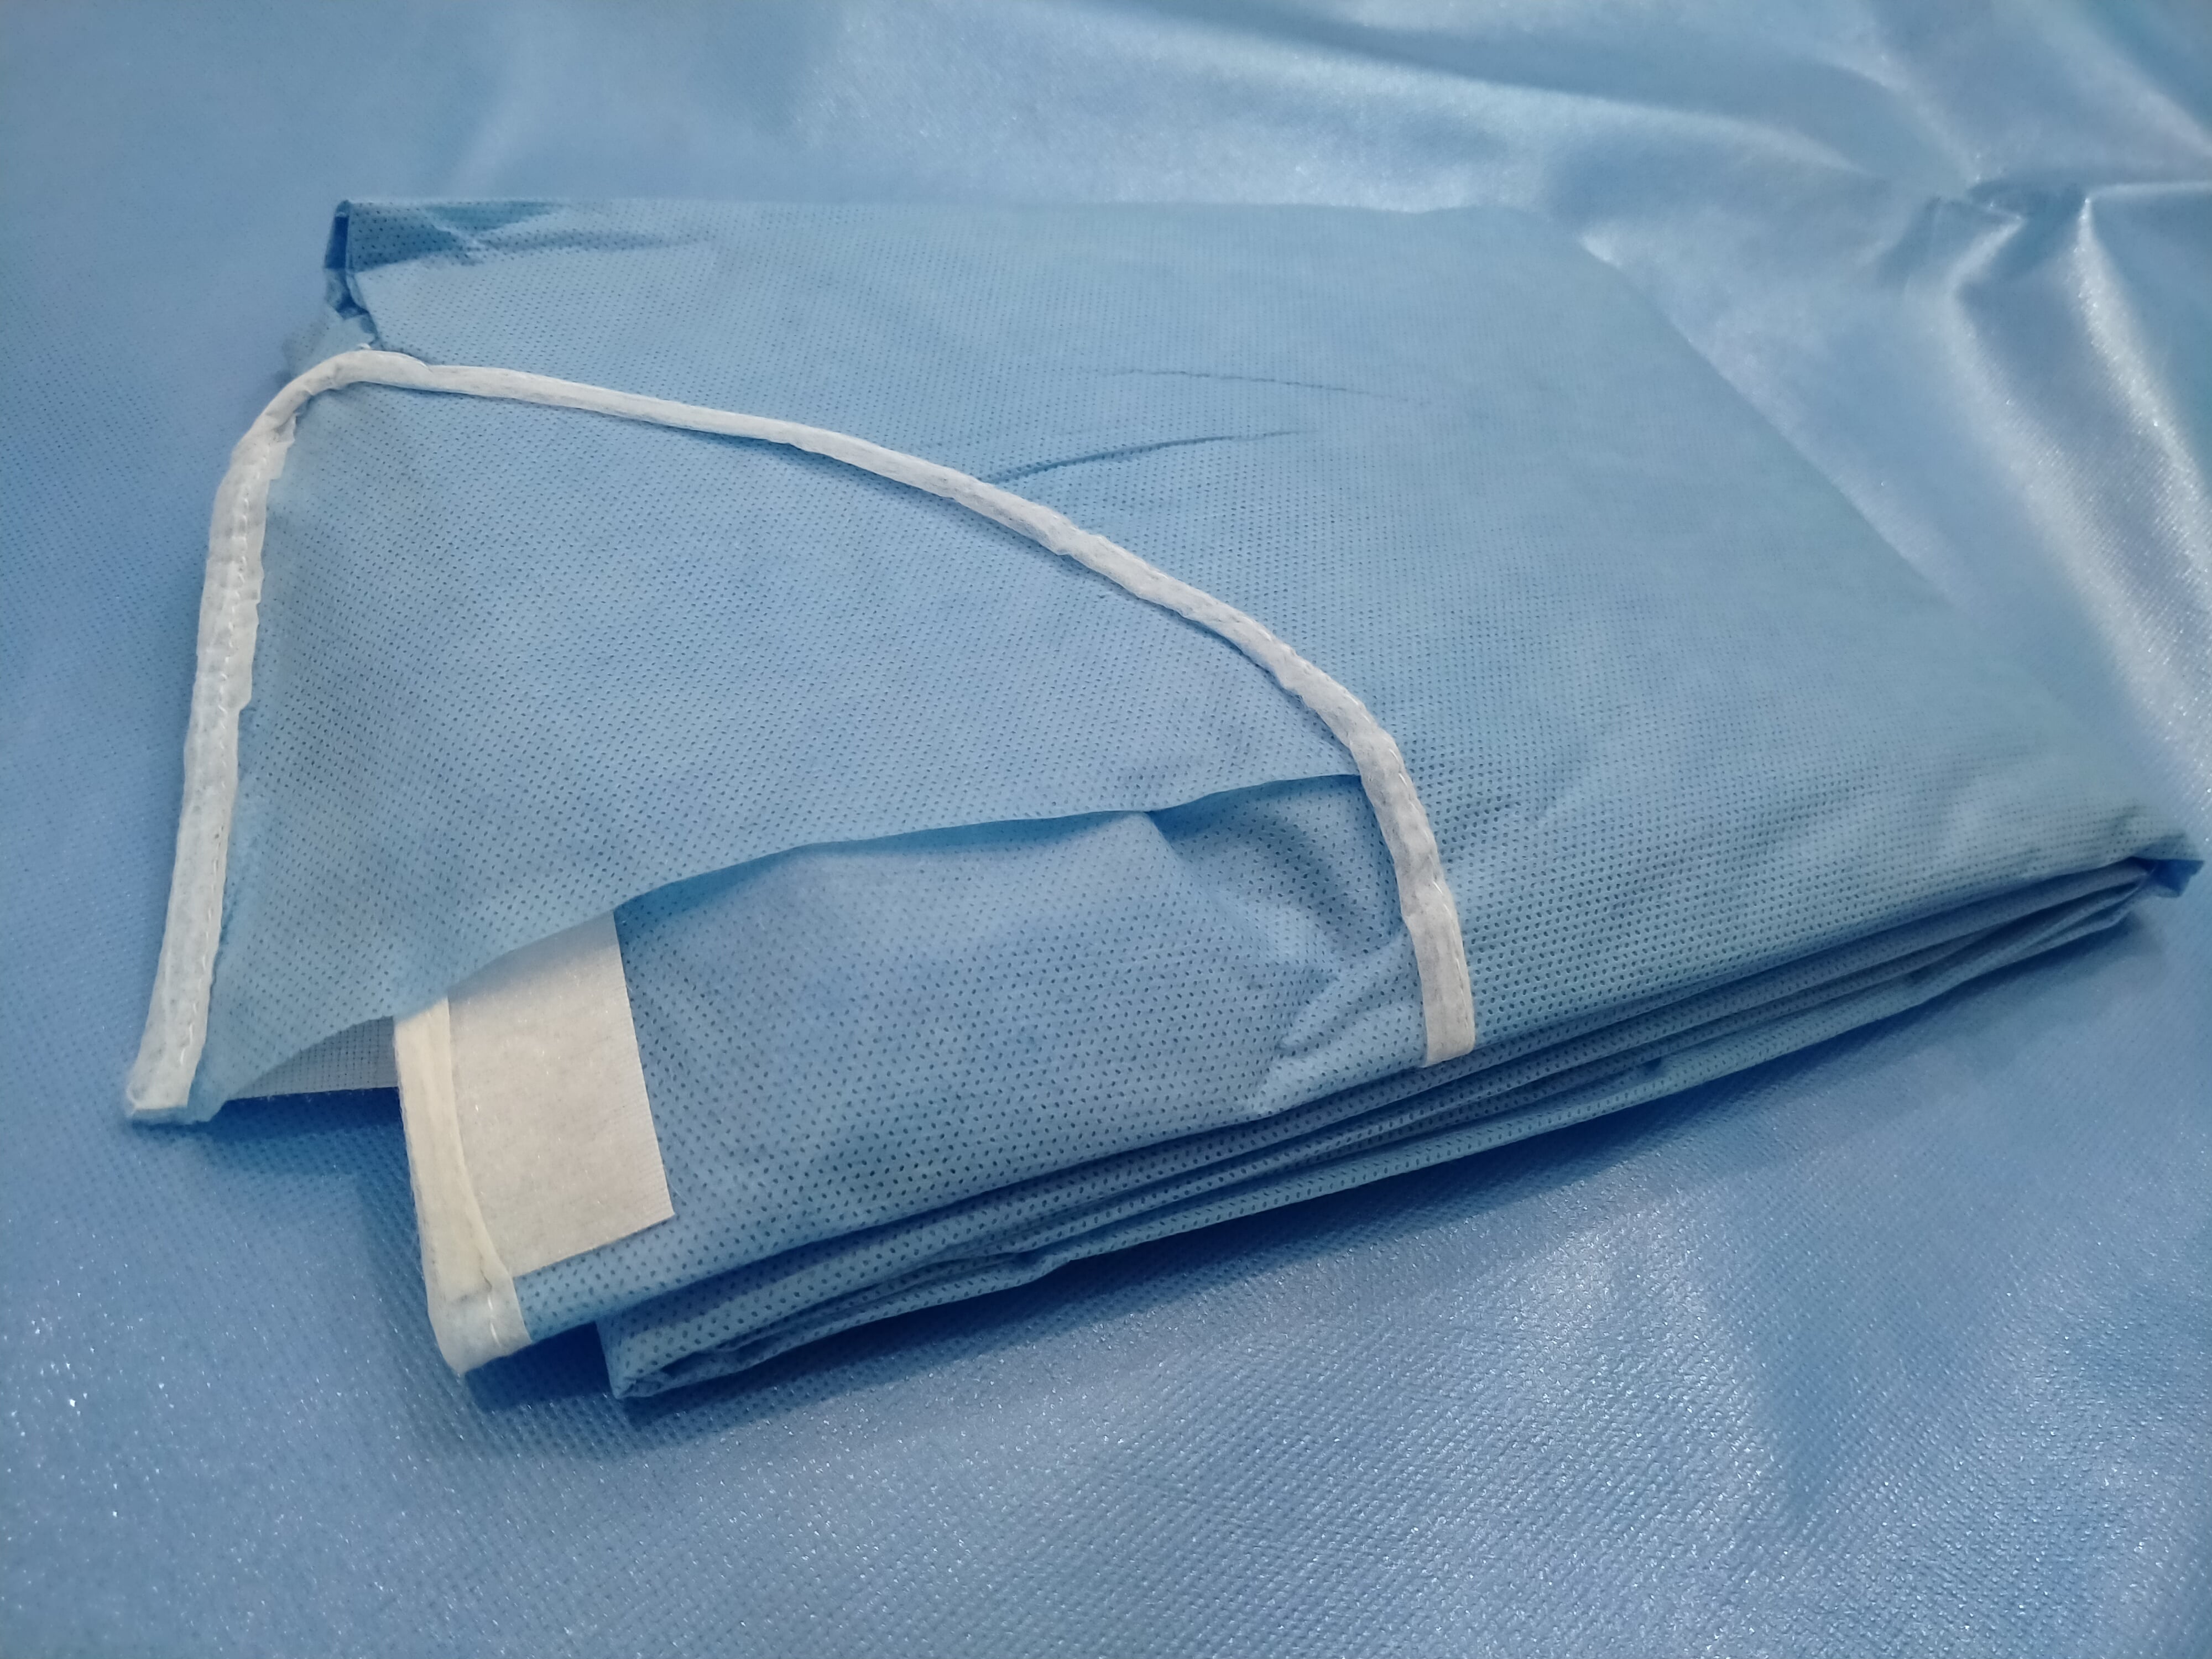 SMS Surgical Gown